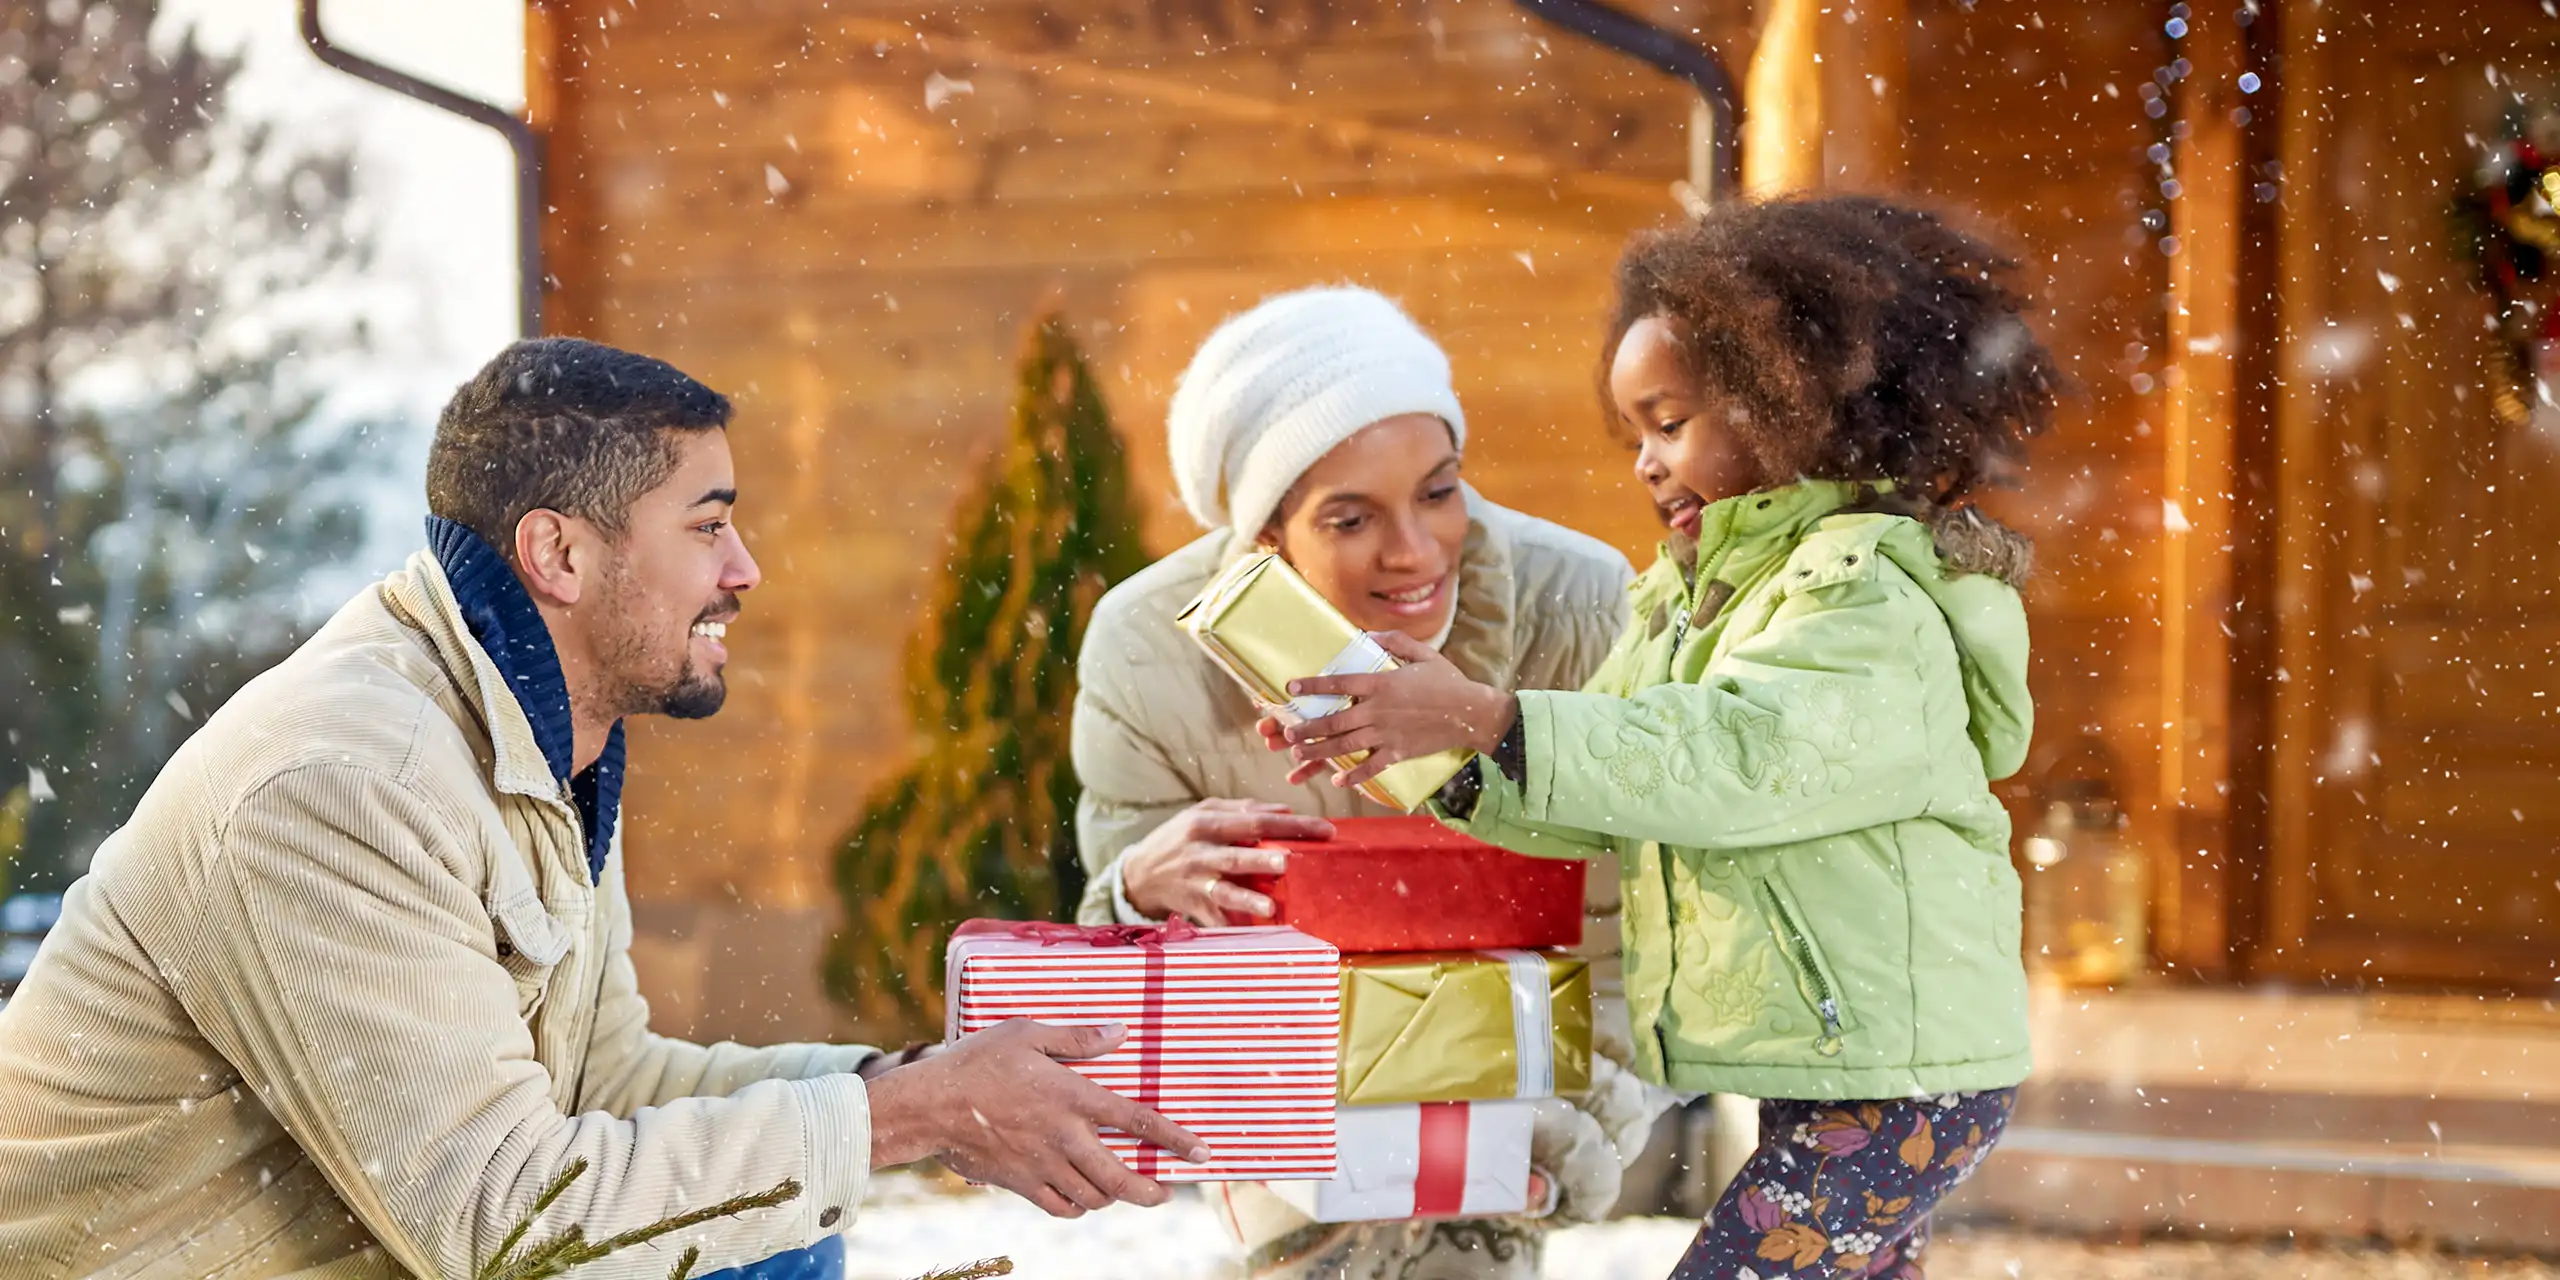 family gift giving holidays snowing; Courtesy of Lucky Business /Shutterstock